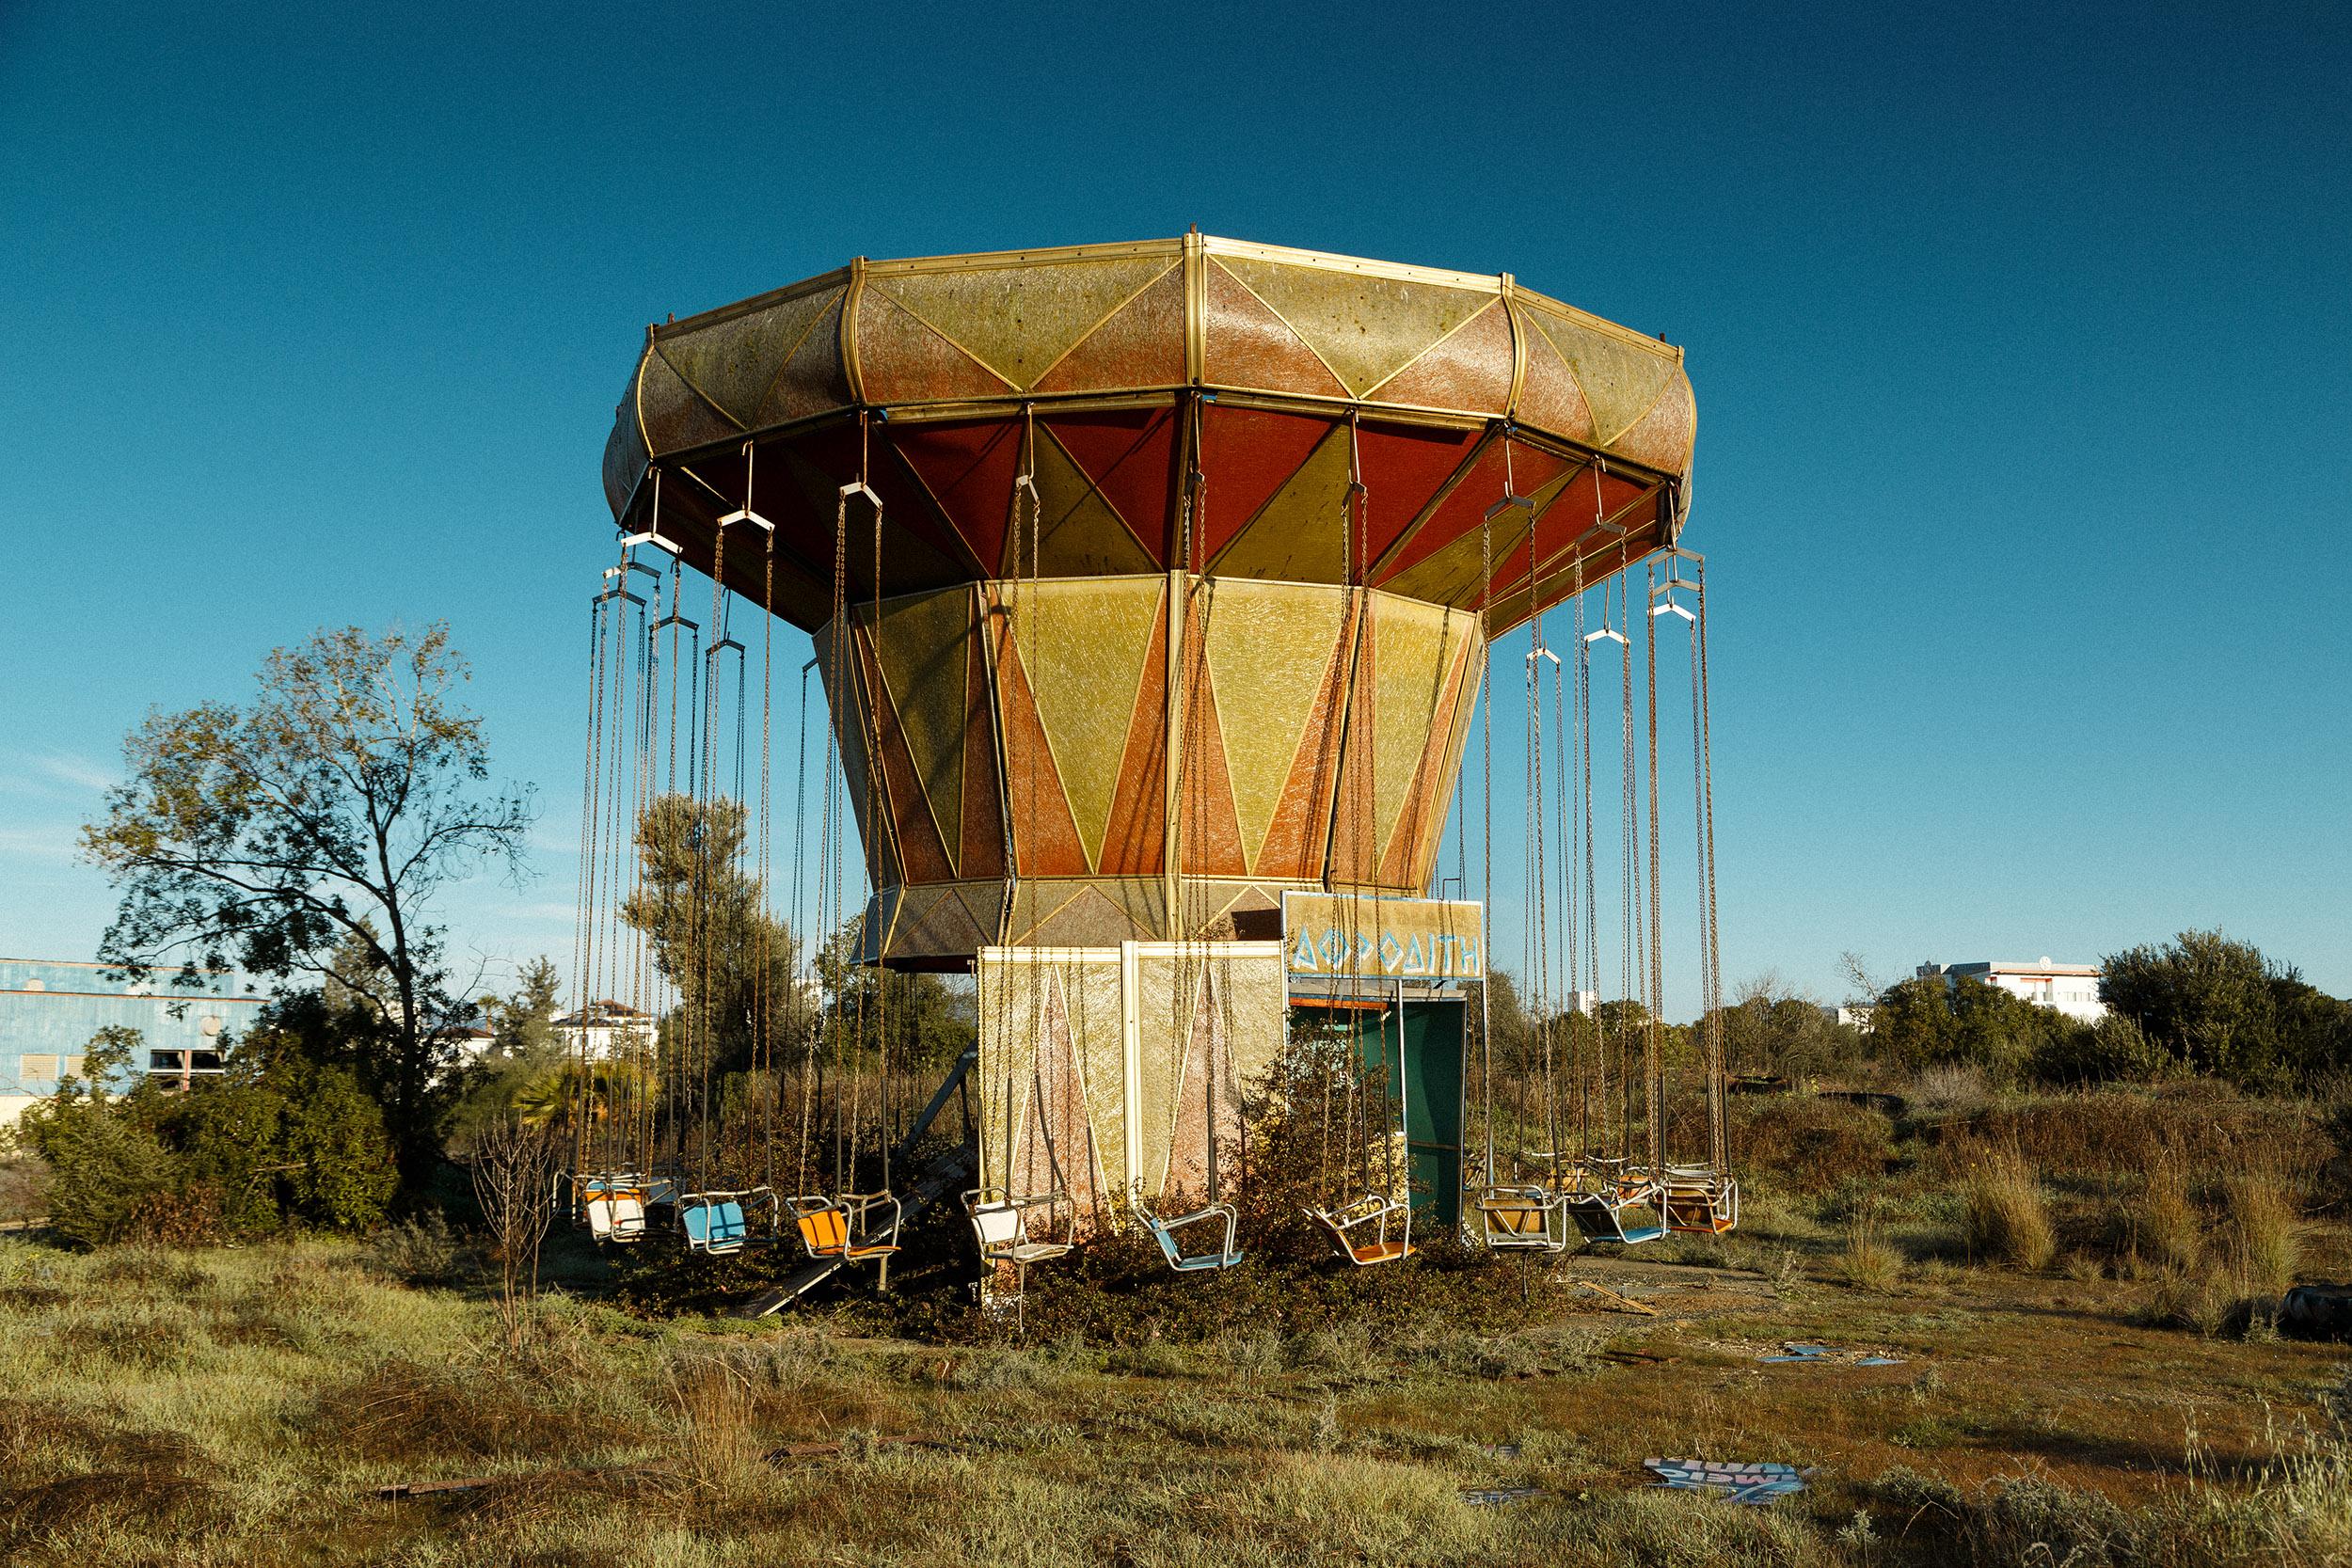 "Flying Carousel", photography by Dimitri Bourriau. Print mounted on aluminum with plexiglas, framed. Edition of 15.

Dimitri Bourriau is a French photographer, he has always been interested in history and architectural remains. He explores the